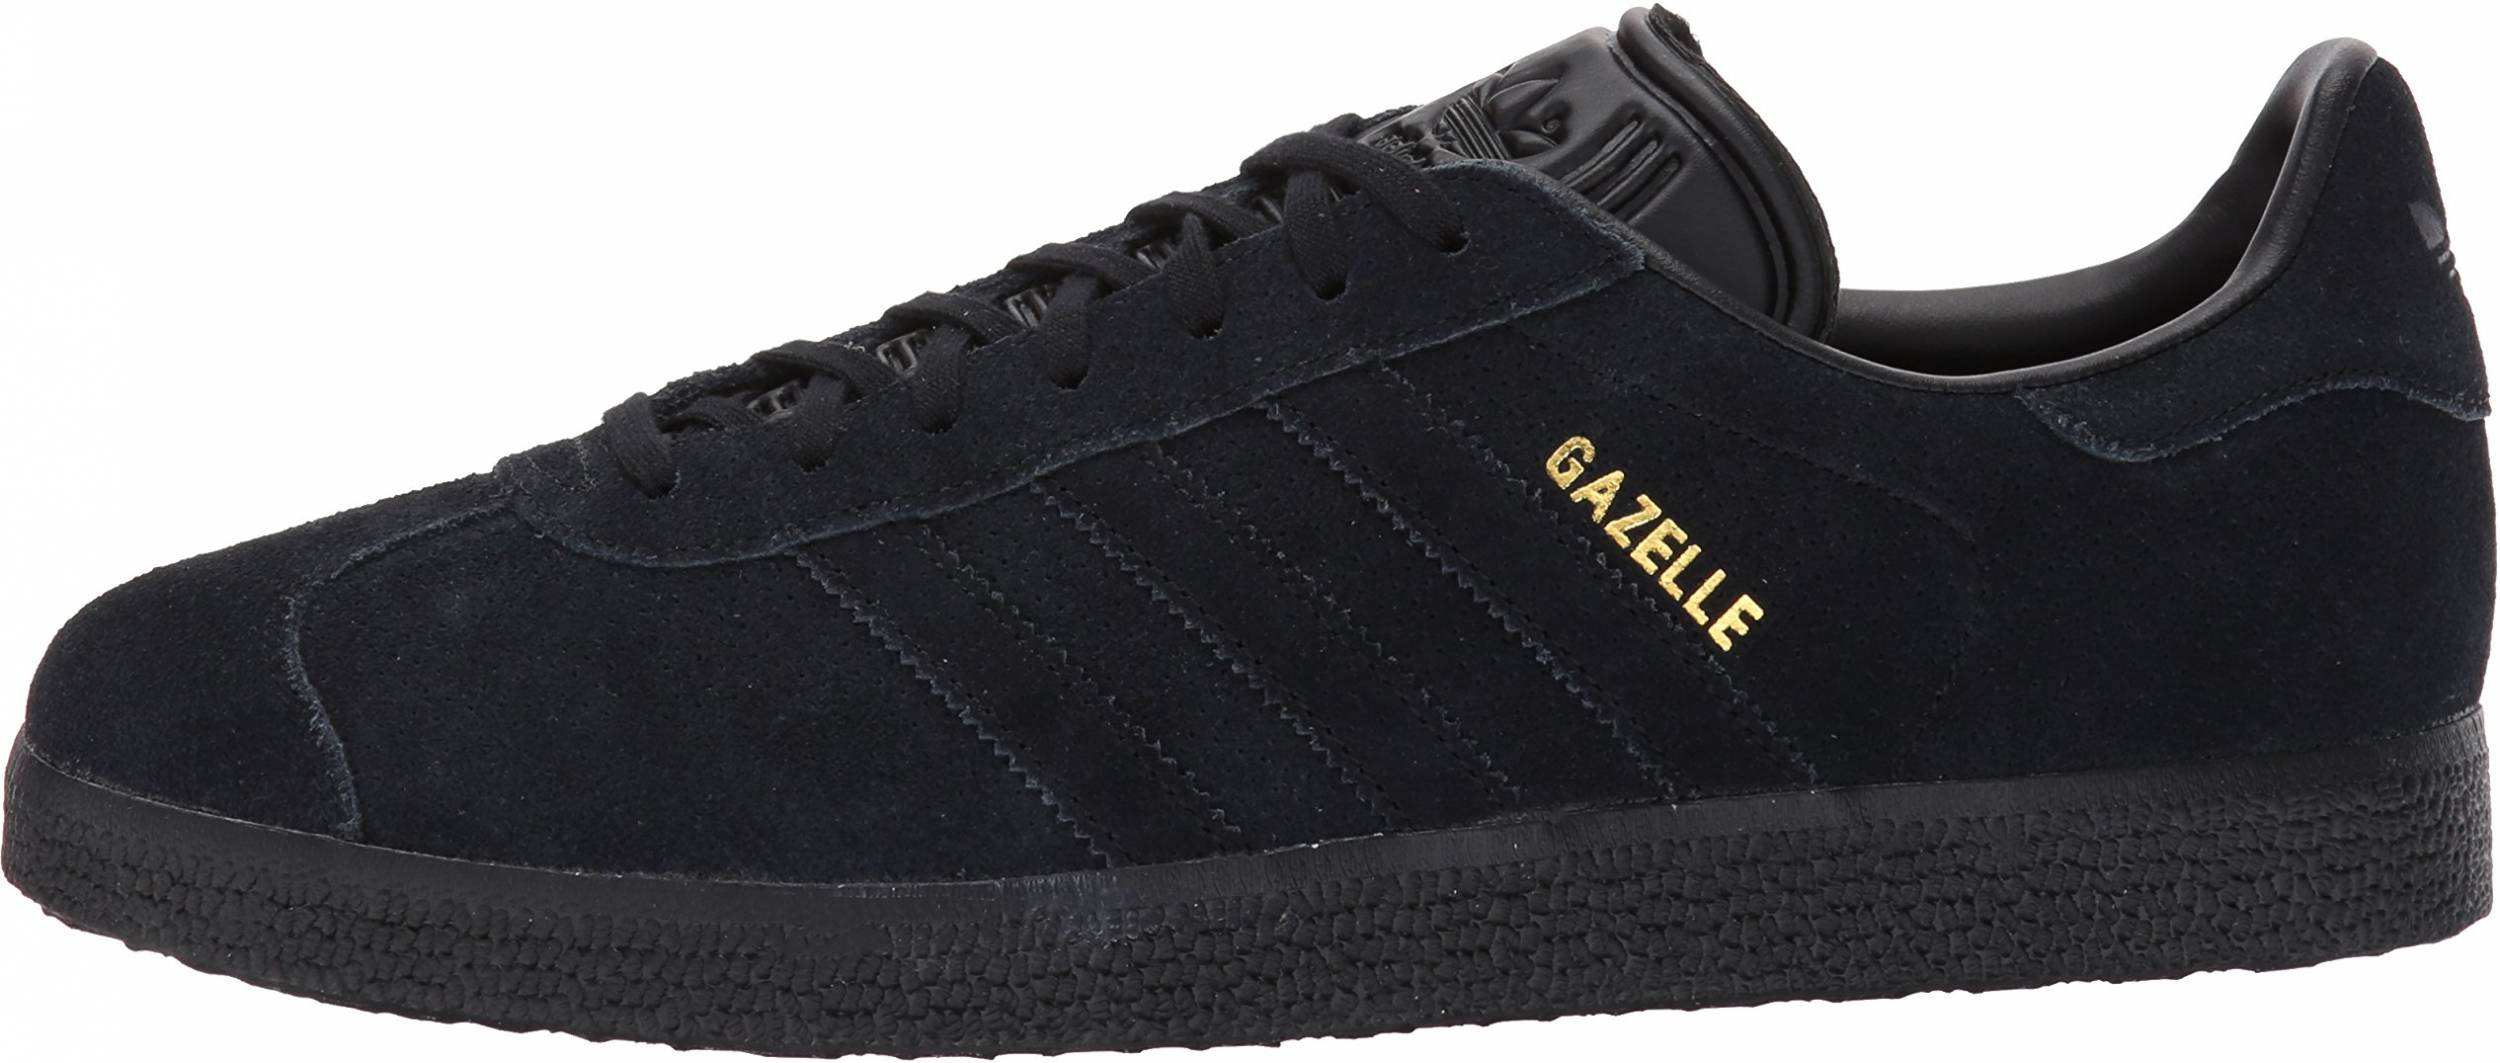 all black leather adidas shoes